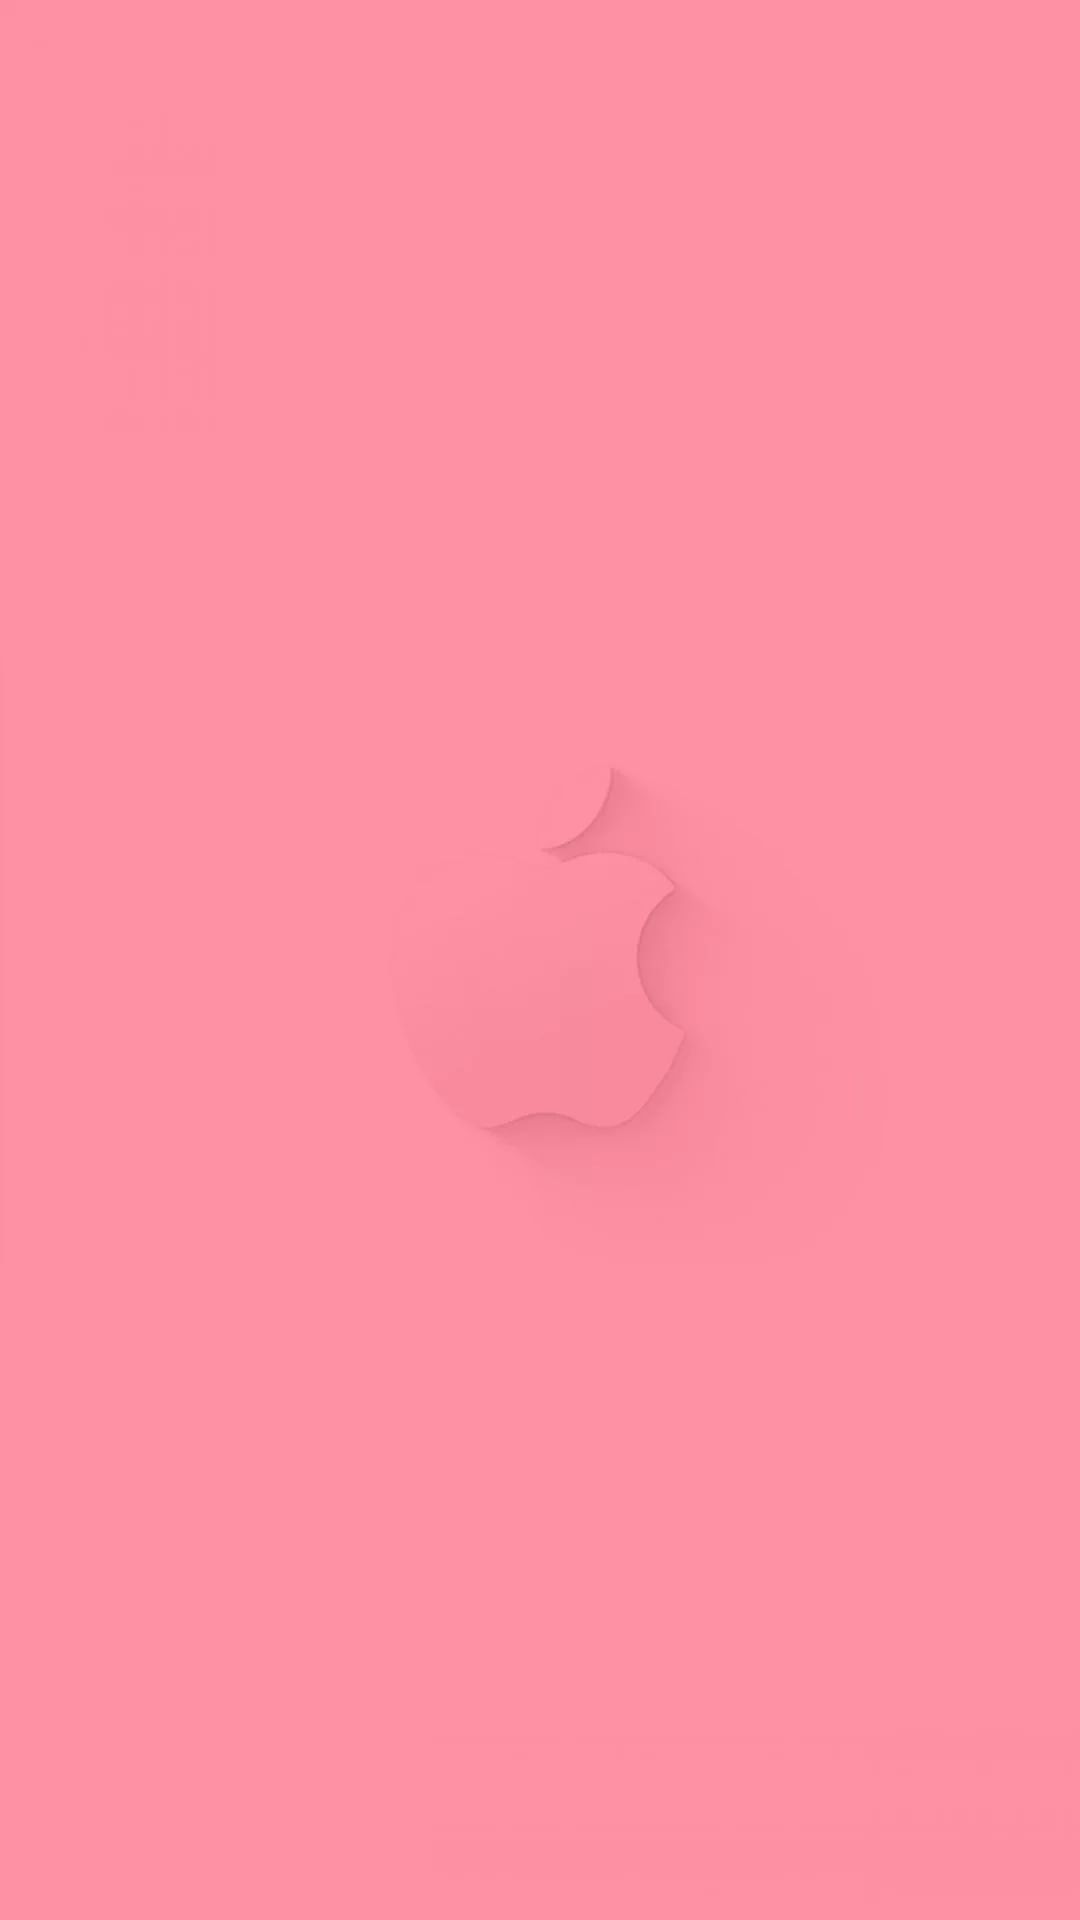 Pink Gradient Solid Color Background Wallpaper Image For Free Download   Pngtree